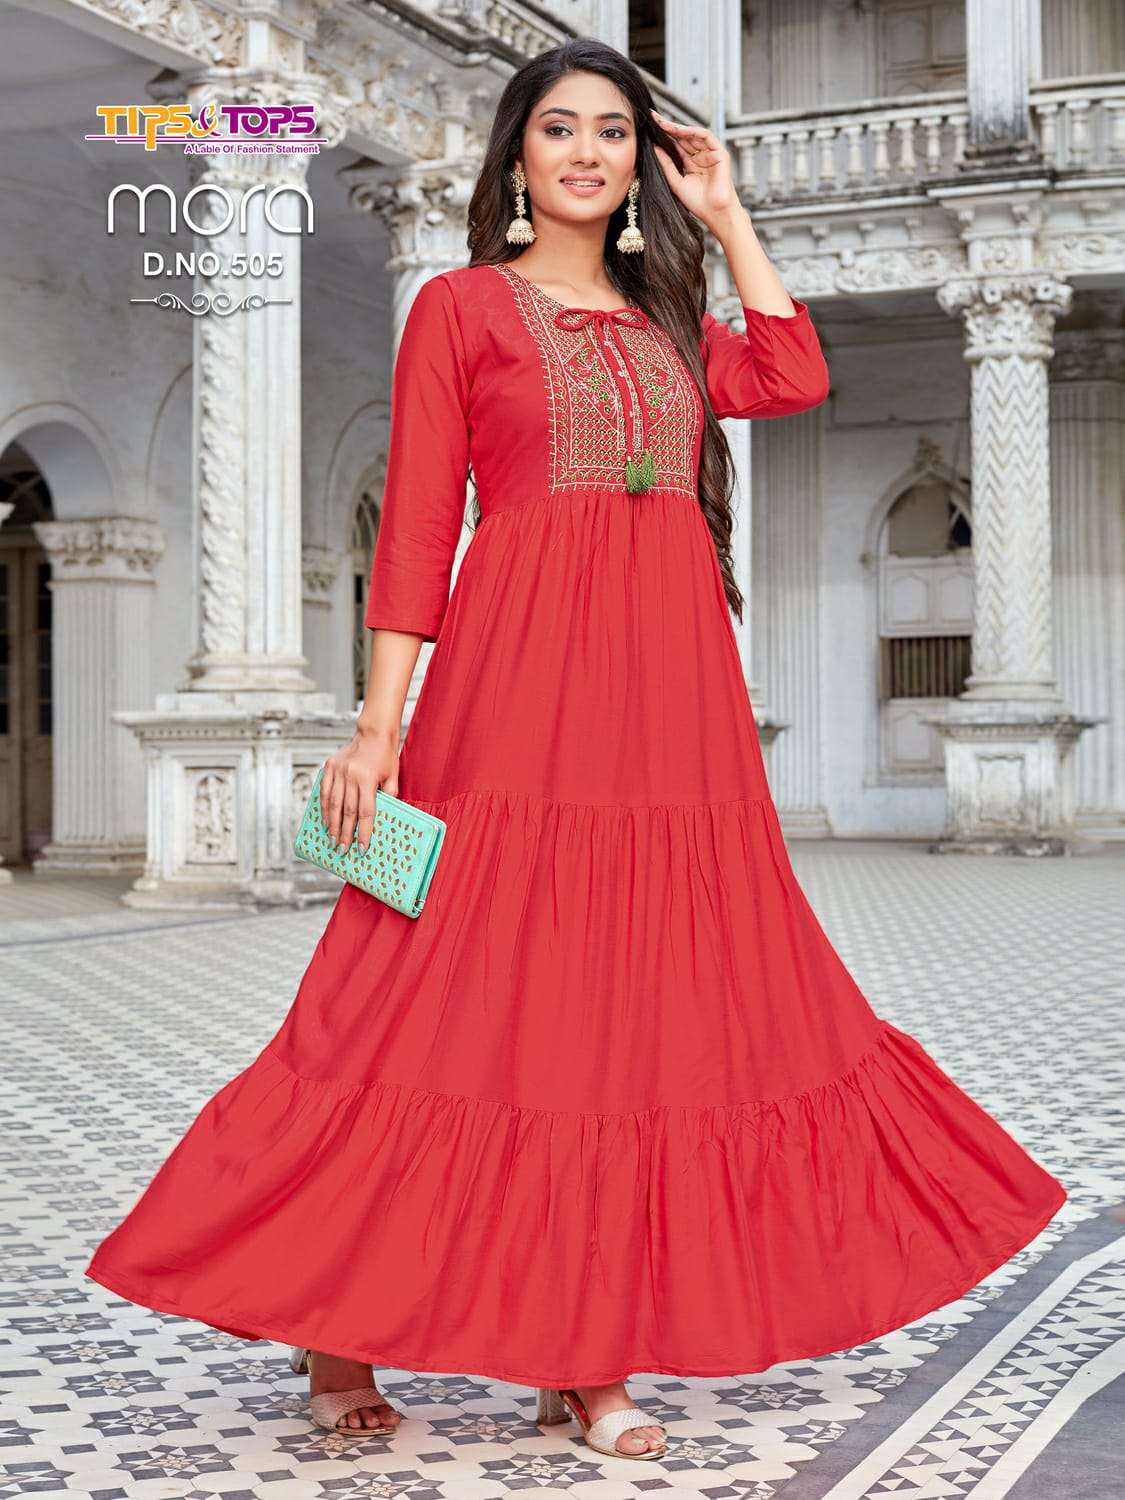 Party Wear Dresses and tops Online India œ | by Amor Fashion | Medium